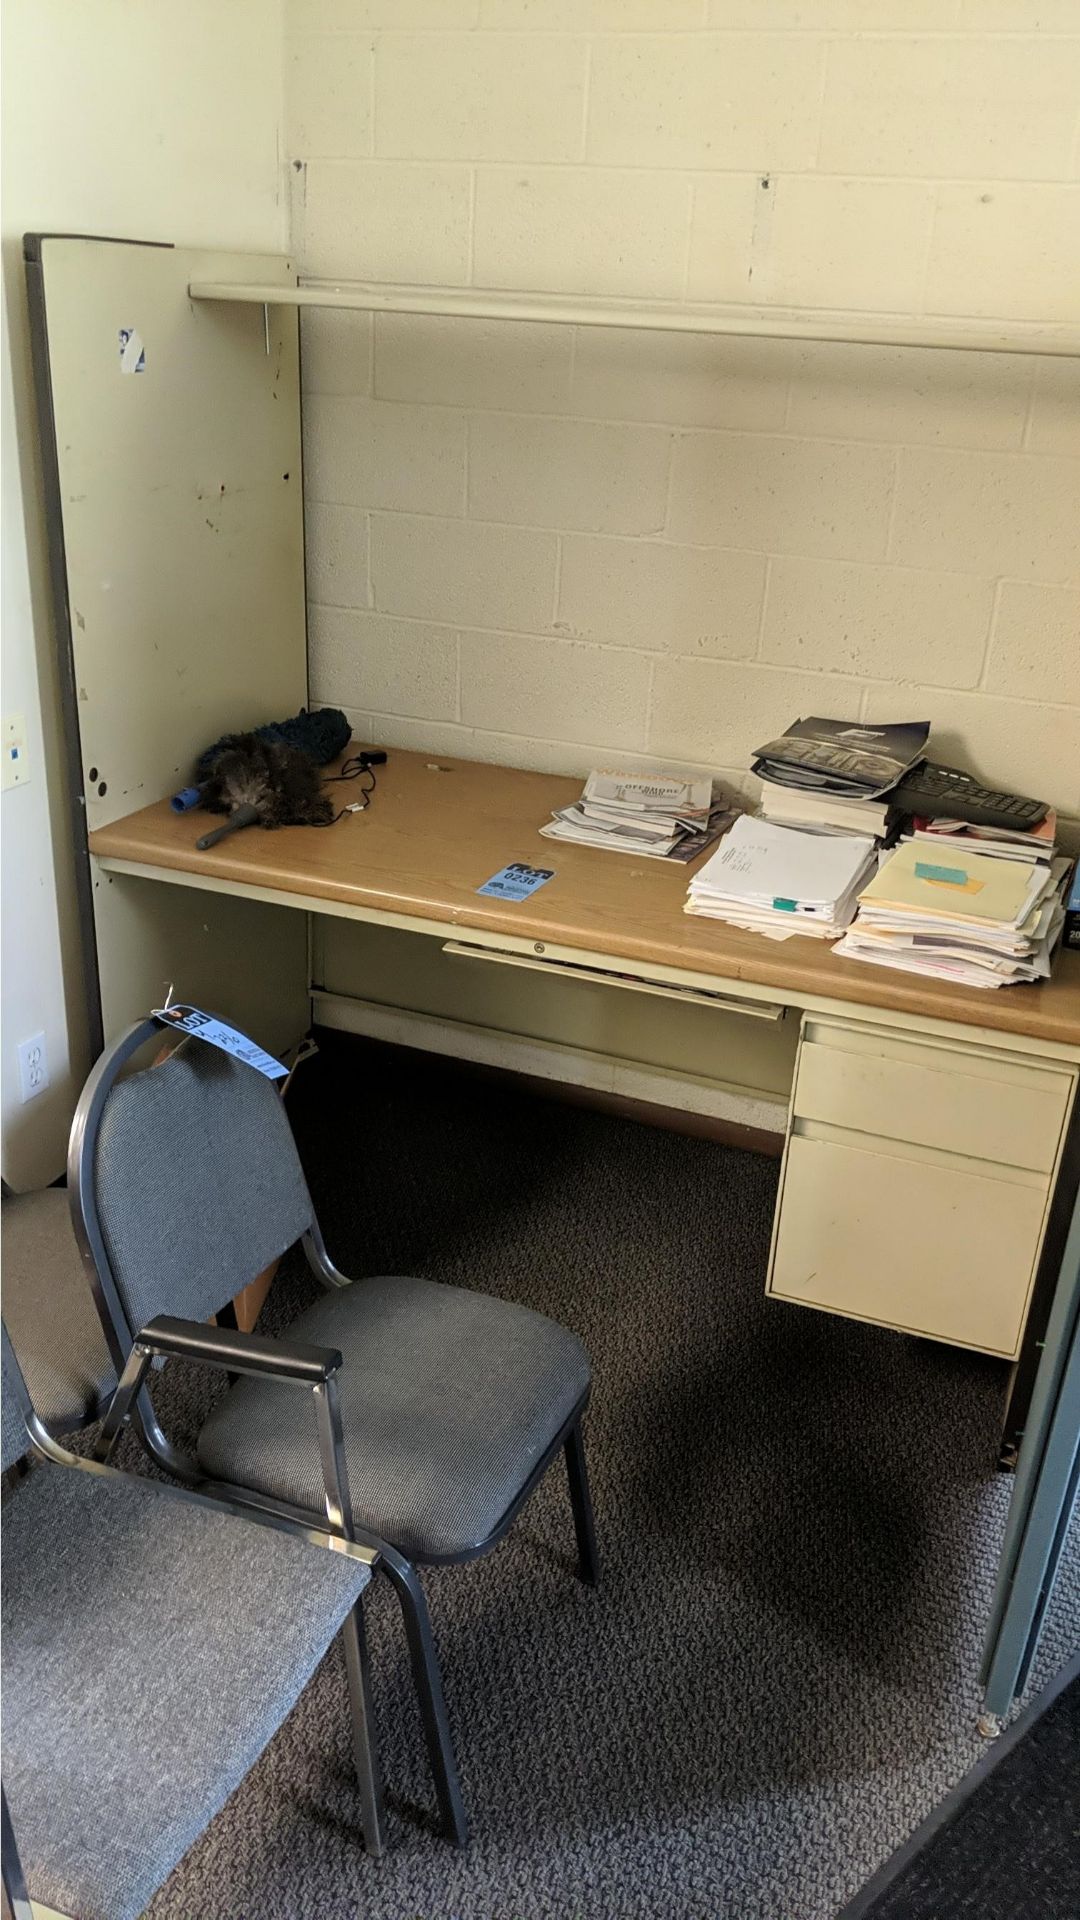 (LOT) DESK AND SIDE CHAIRS